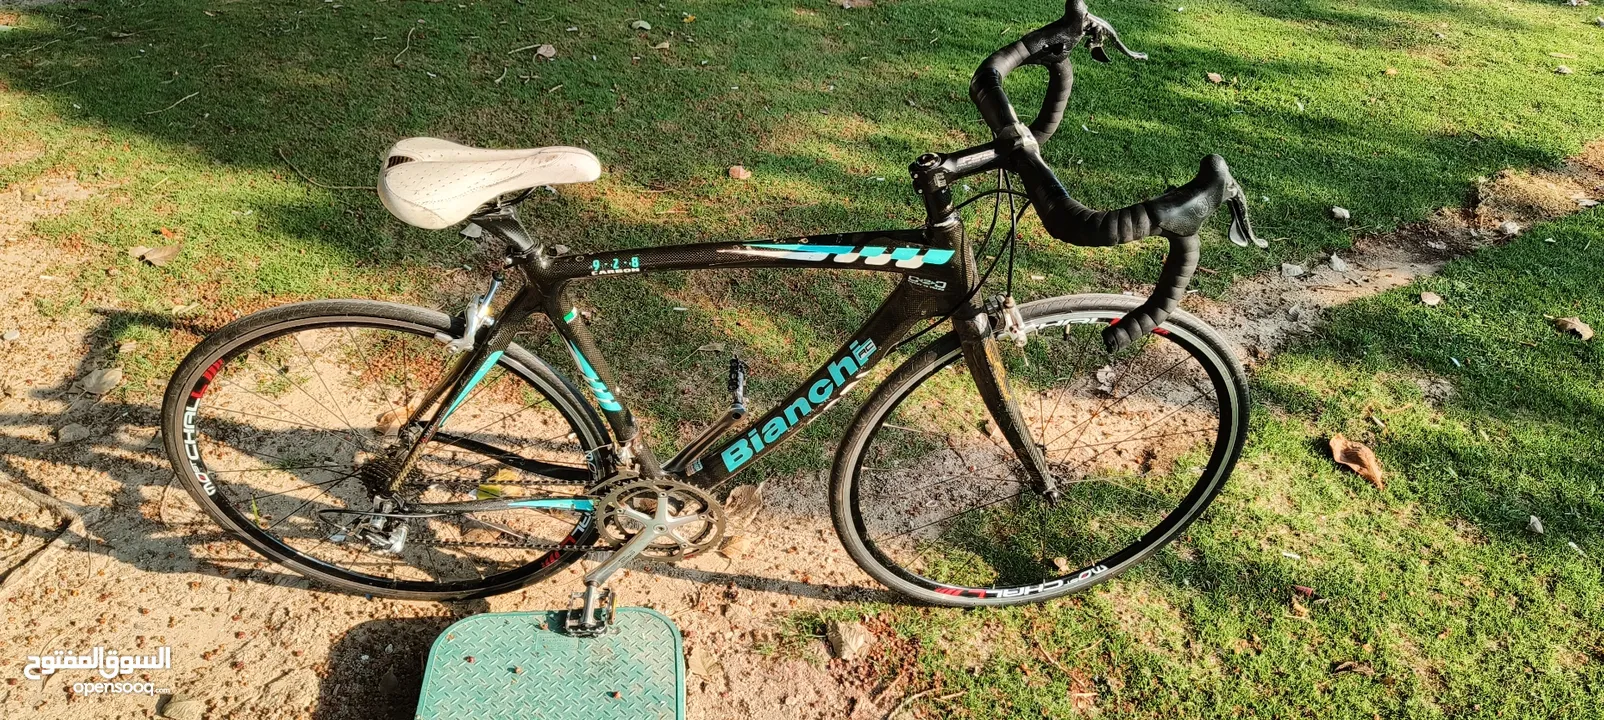 BIANCHI 928 C2C 10 ITALY FOR SELL